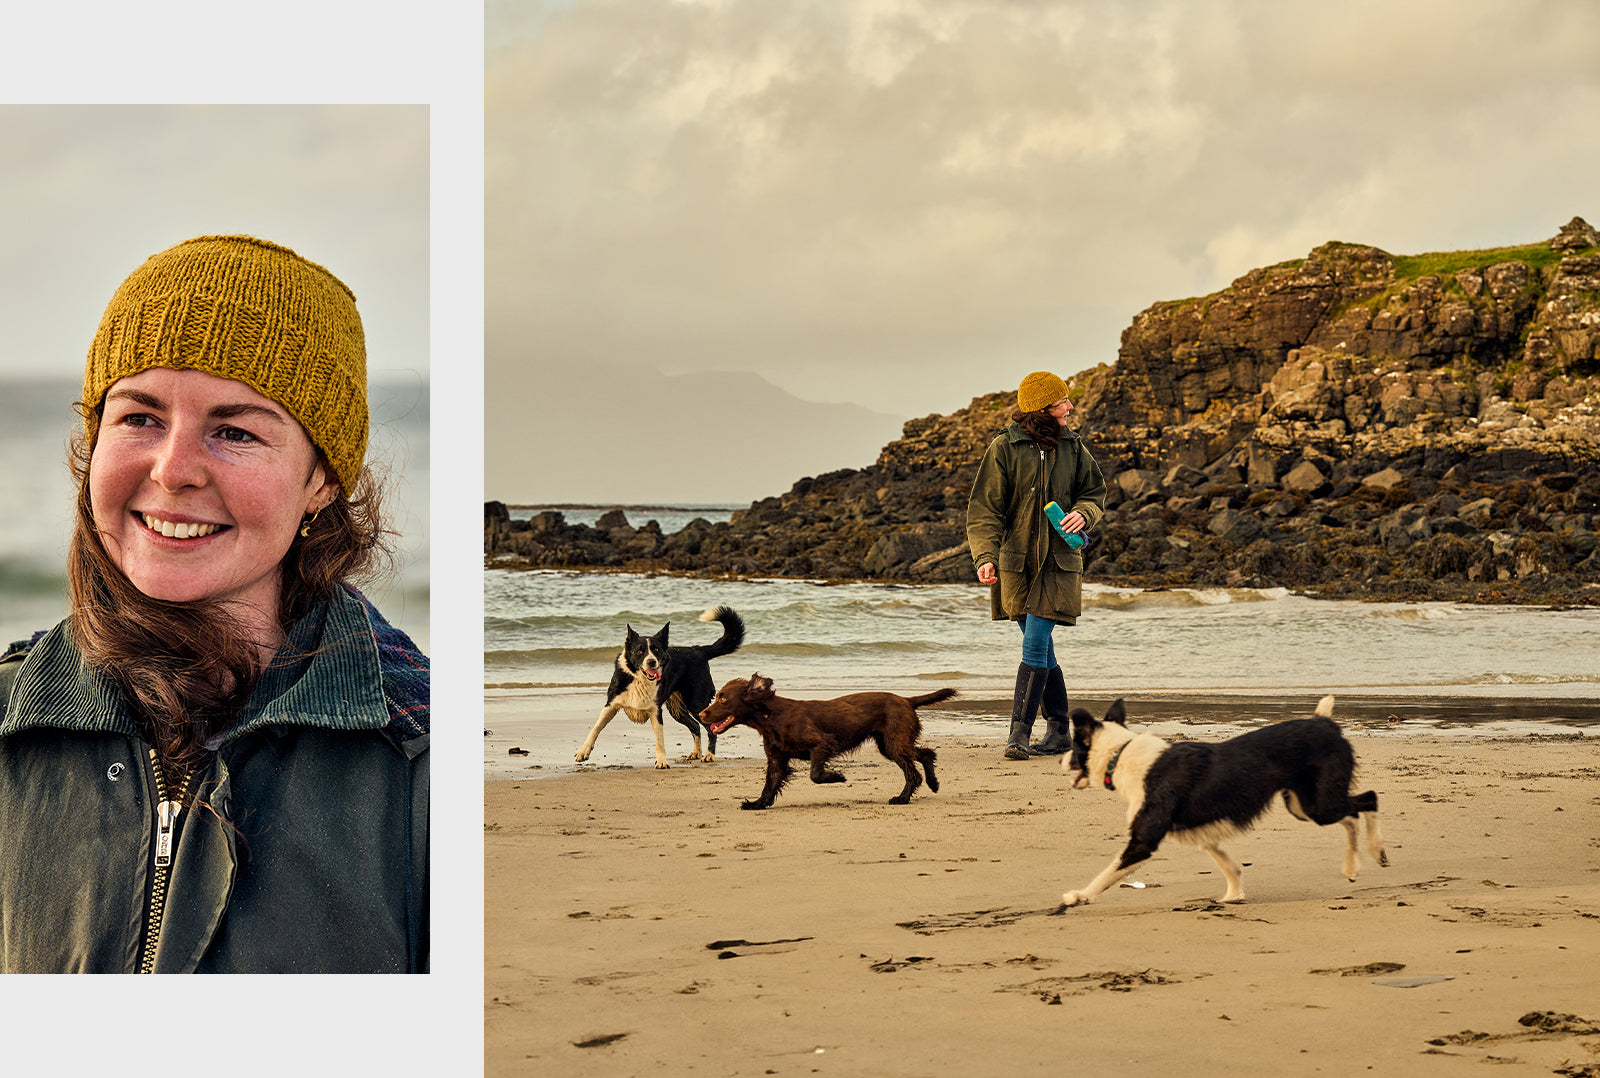 Main image of Phoebe walking along a beach with her dogs with the tide and  a small rocky cliff behind her. Inset is a head portrait of Phoebe, wearing a yellow beanie hat